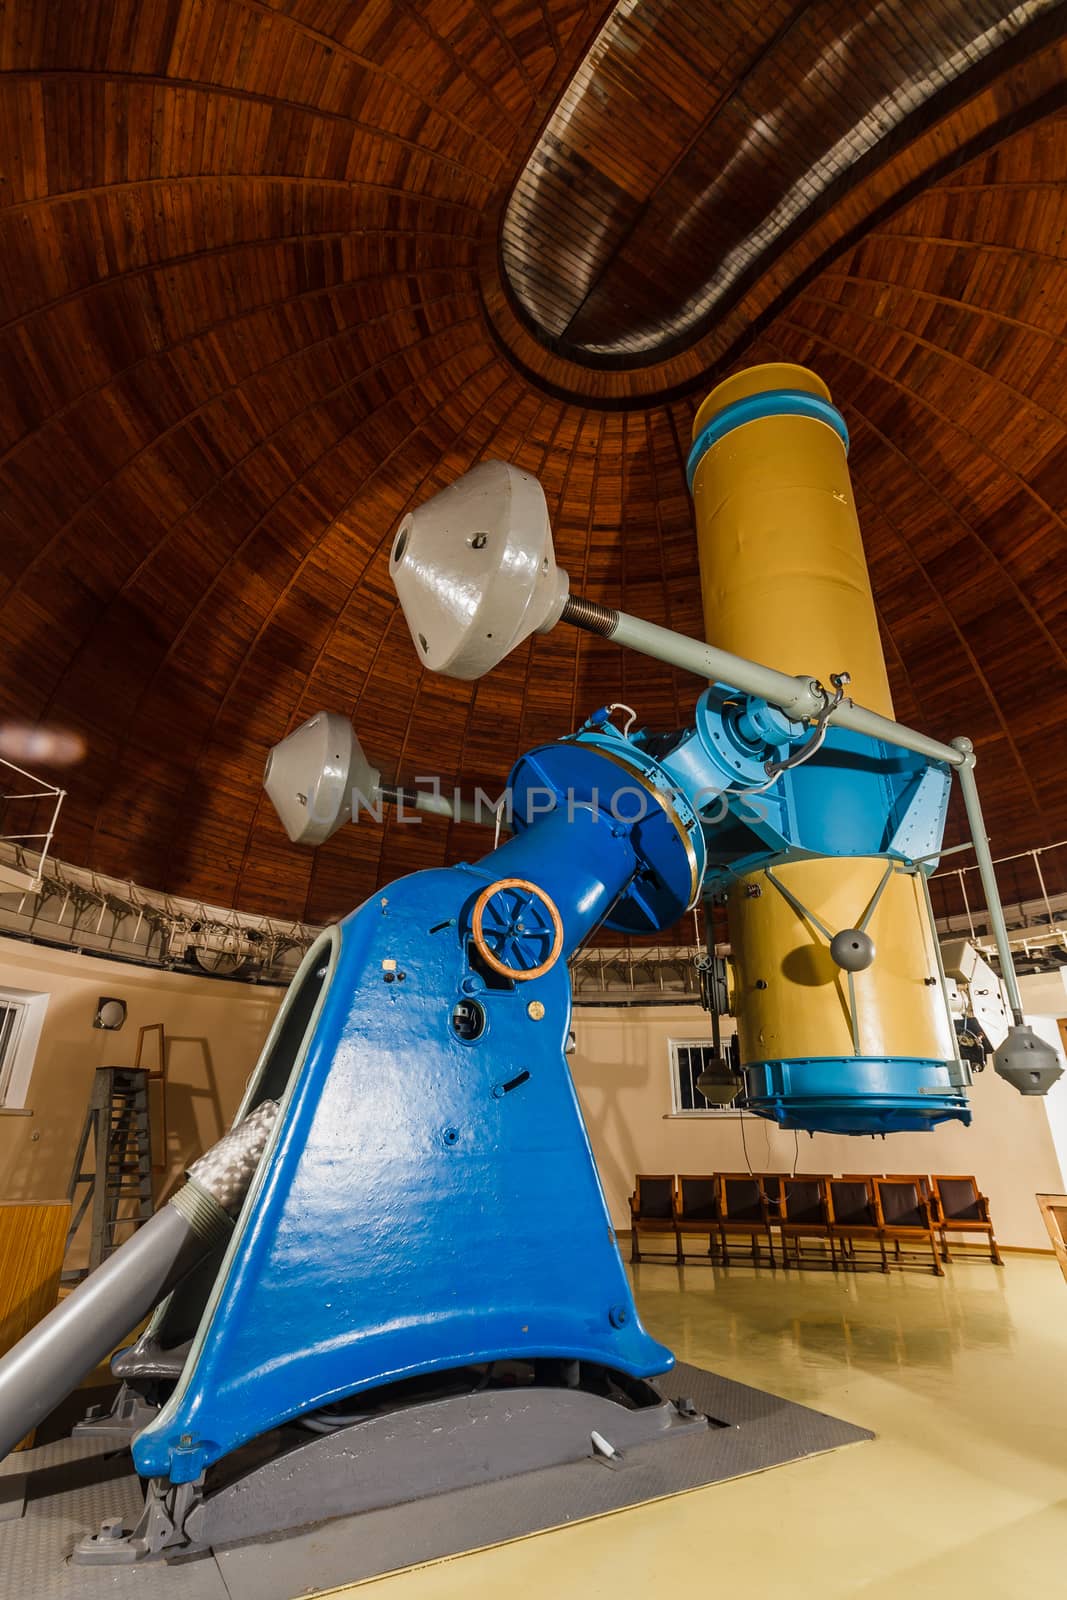 Old trophy large optical telescope at display